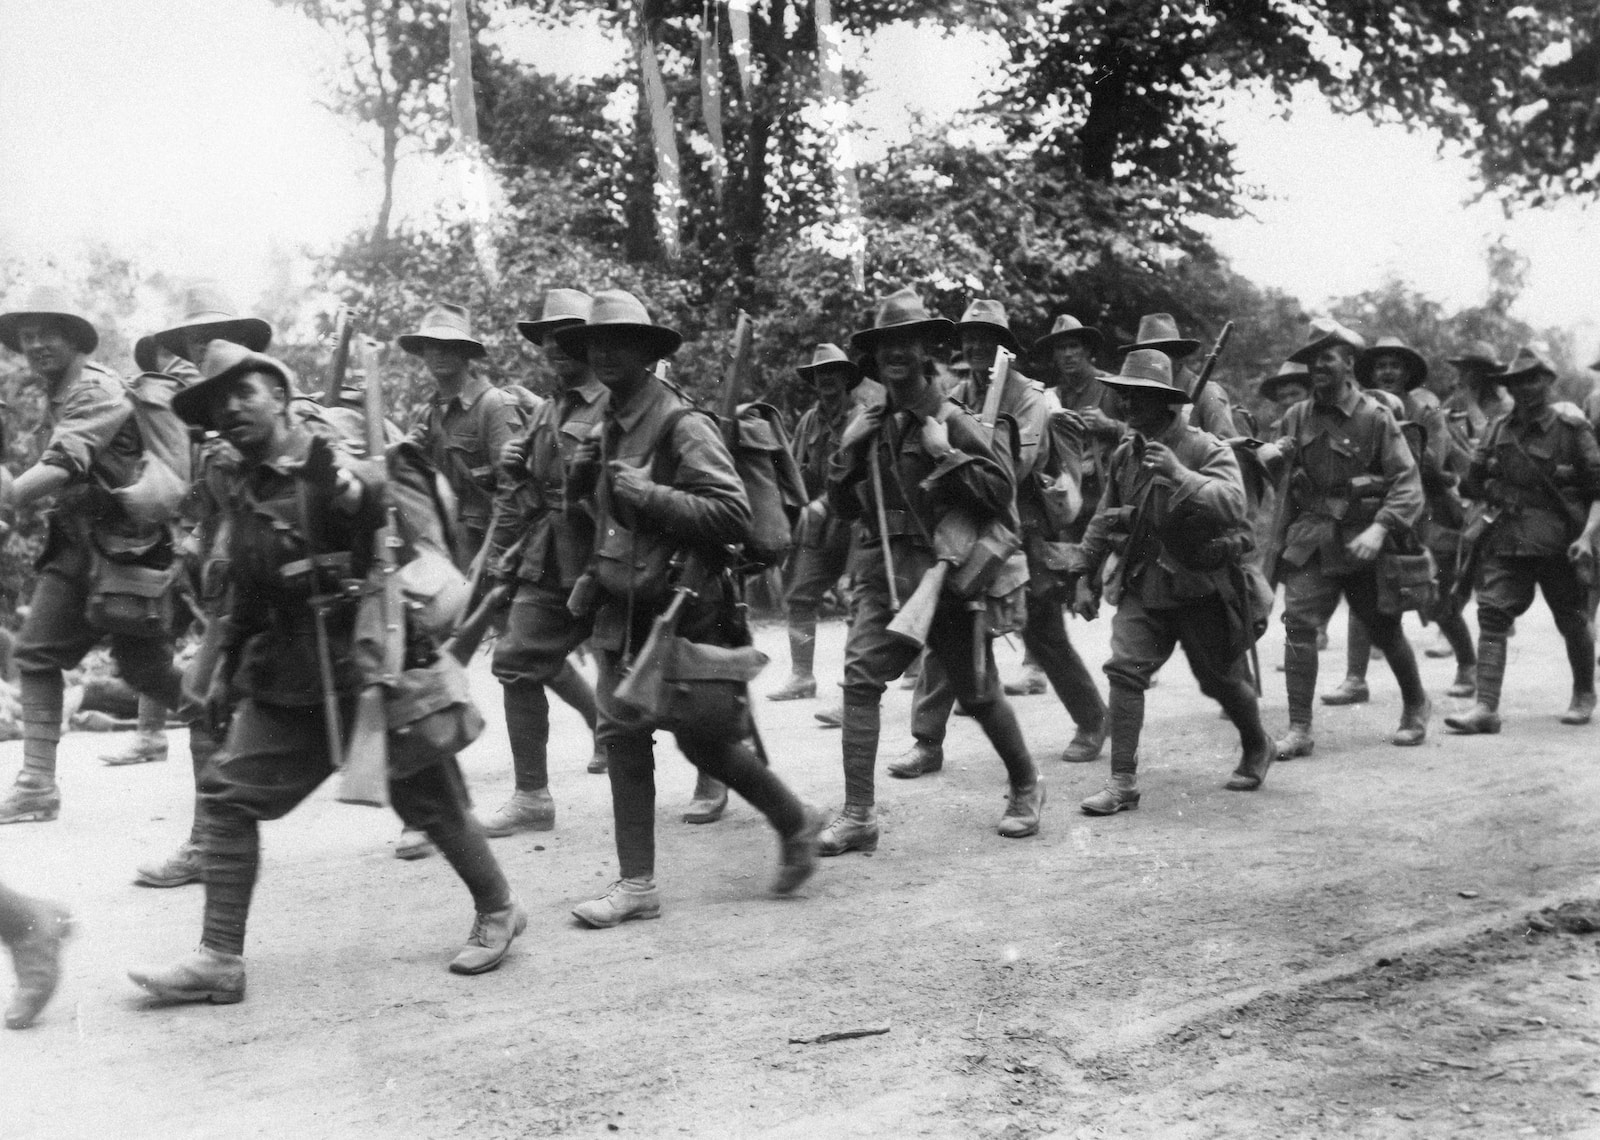 a group of soldiers walking down a dirt road